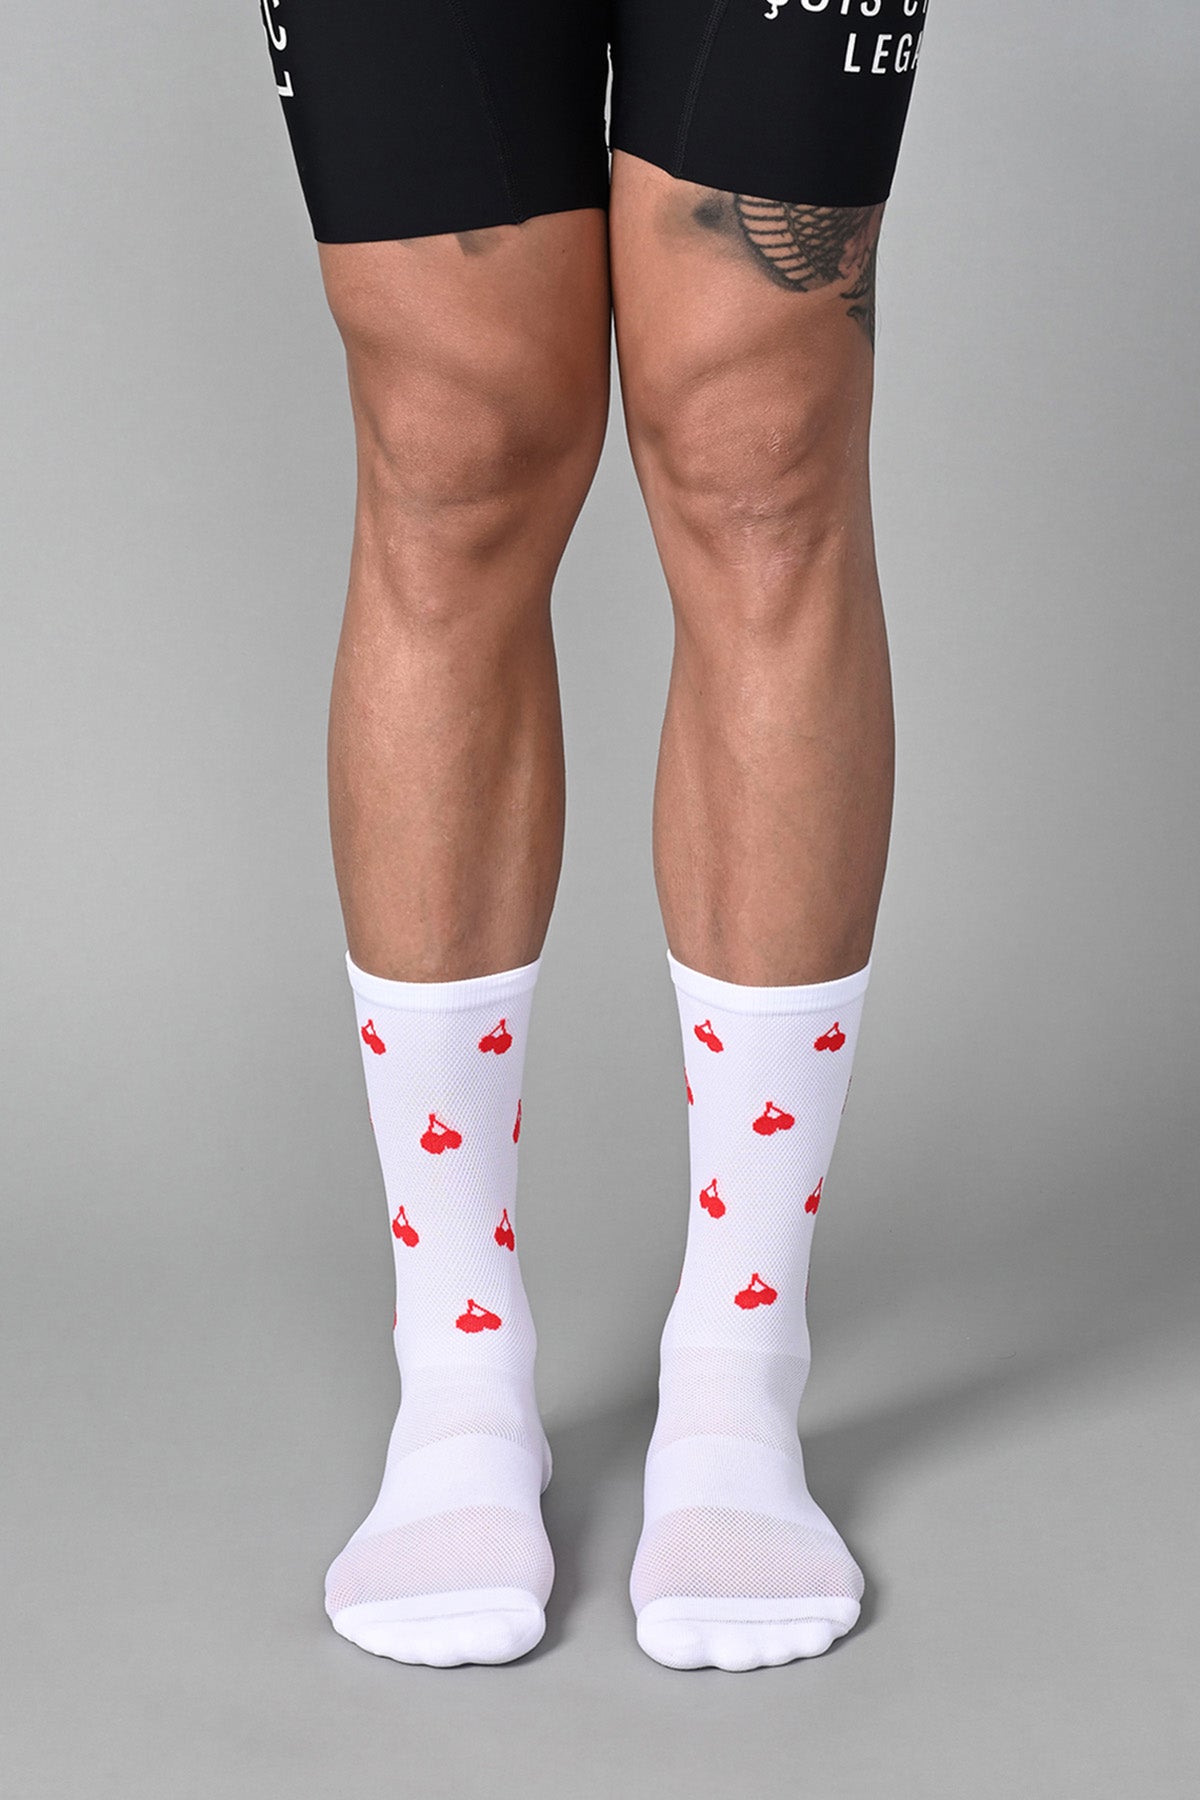 CHERRY - WHITE FRONT | BEST CYCLING SOCKS